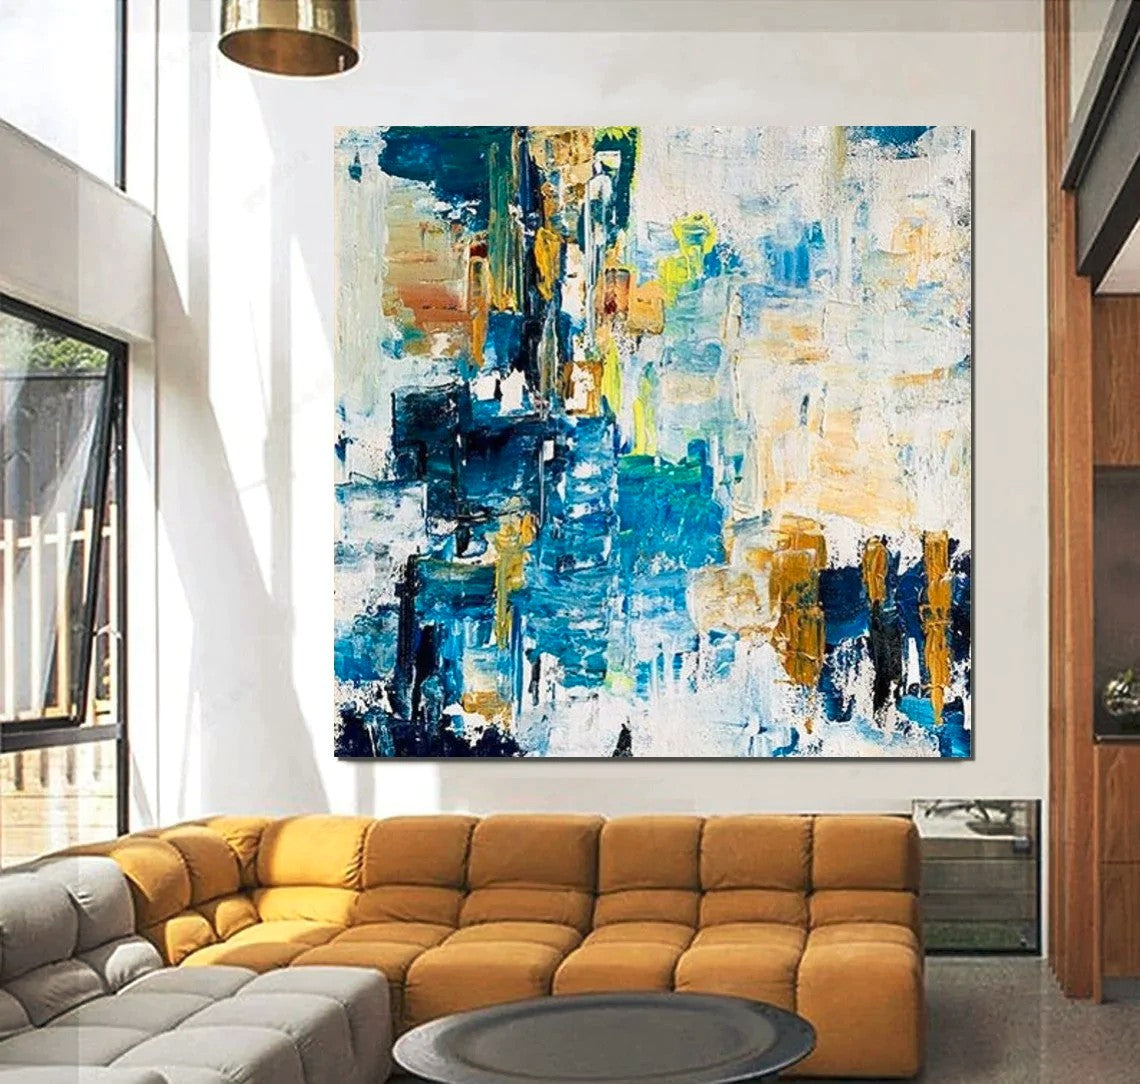 Acrylic Paintings for Bedroom, Large Paintings for Sale, Blue Abstract Acrylic Paintings, Living Room Wall Painting, Contemporary Modern Art, Simple Canvas Painting